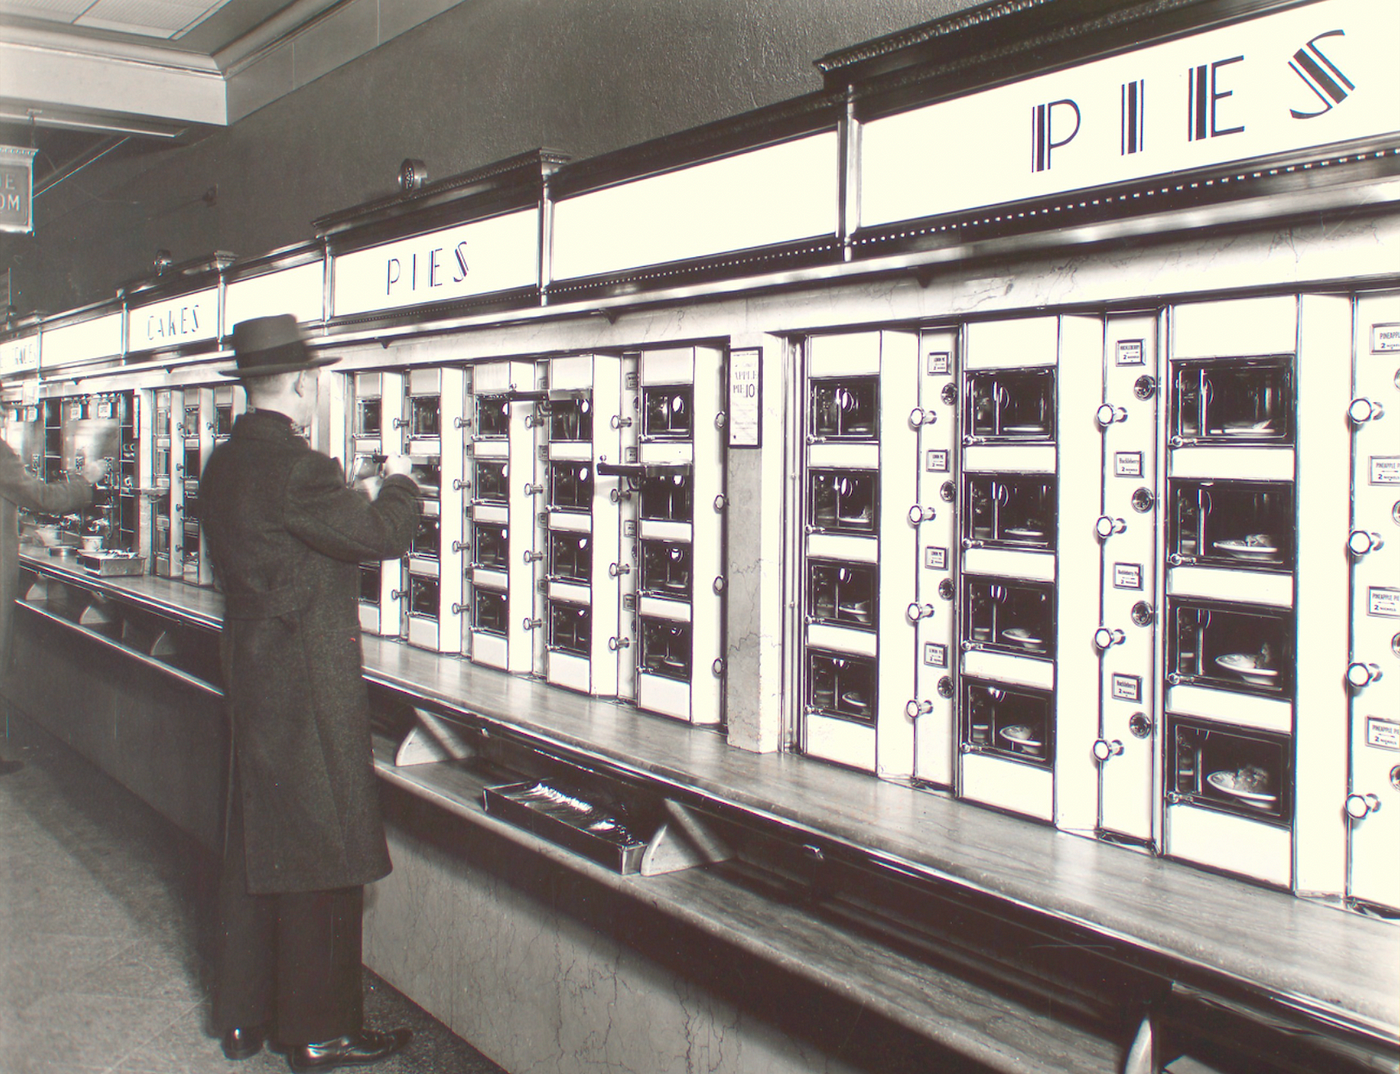 Automats: Food from vending machines.